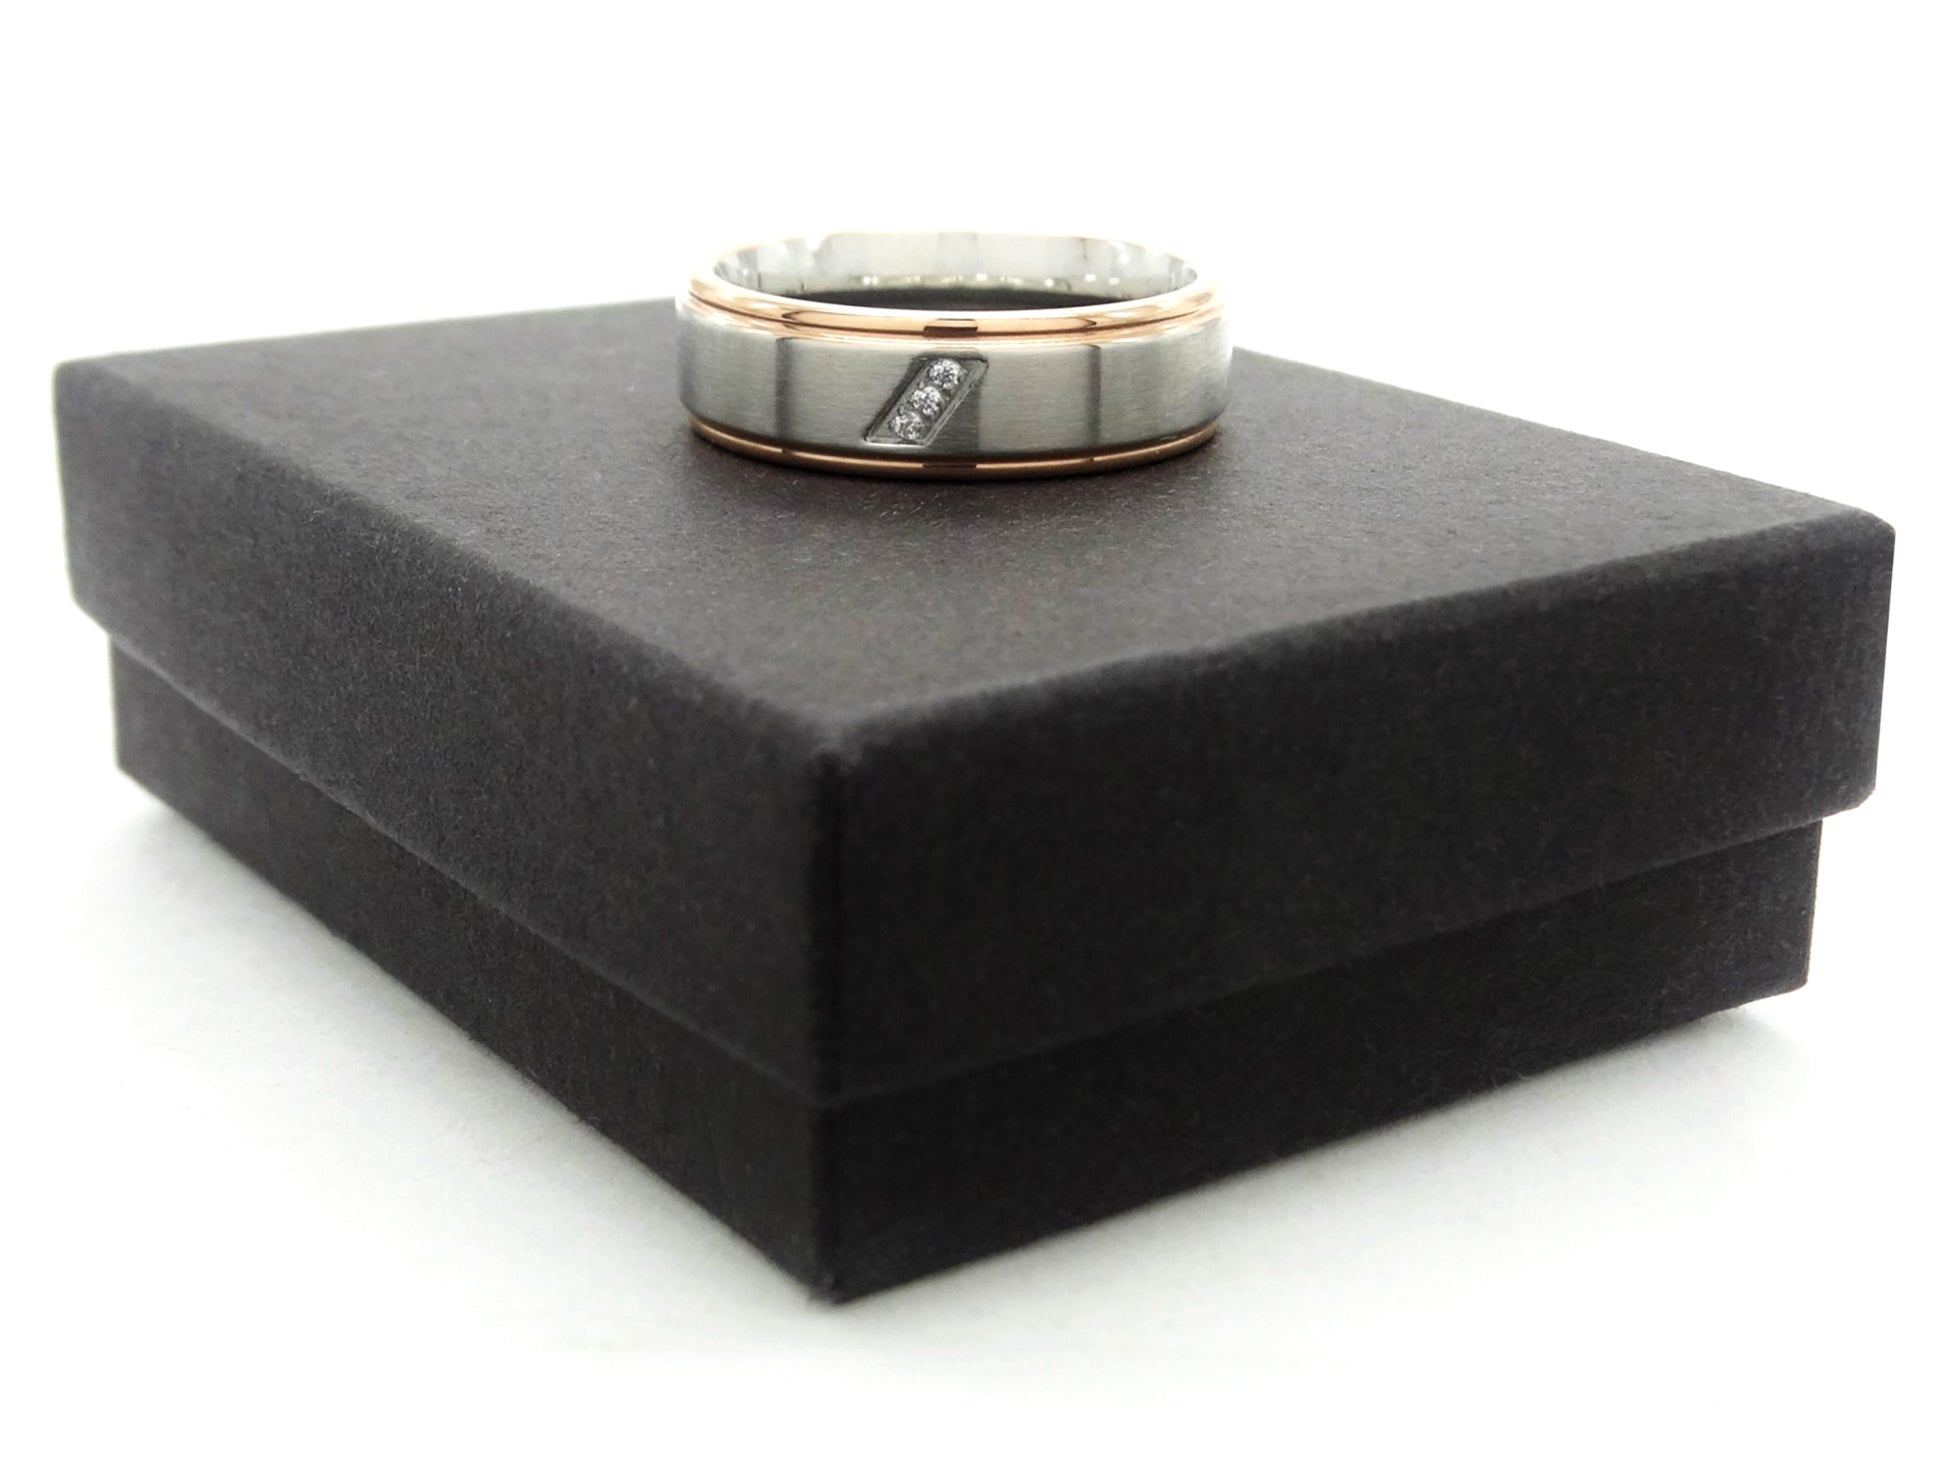 Stainless steel rose gold band ring GIFT BOX